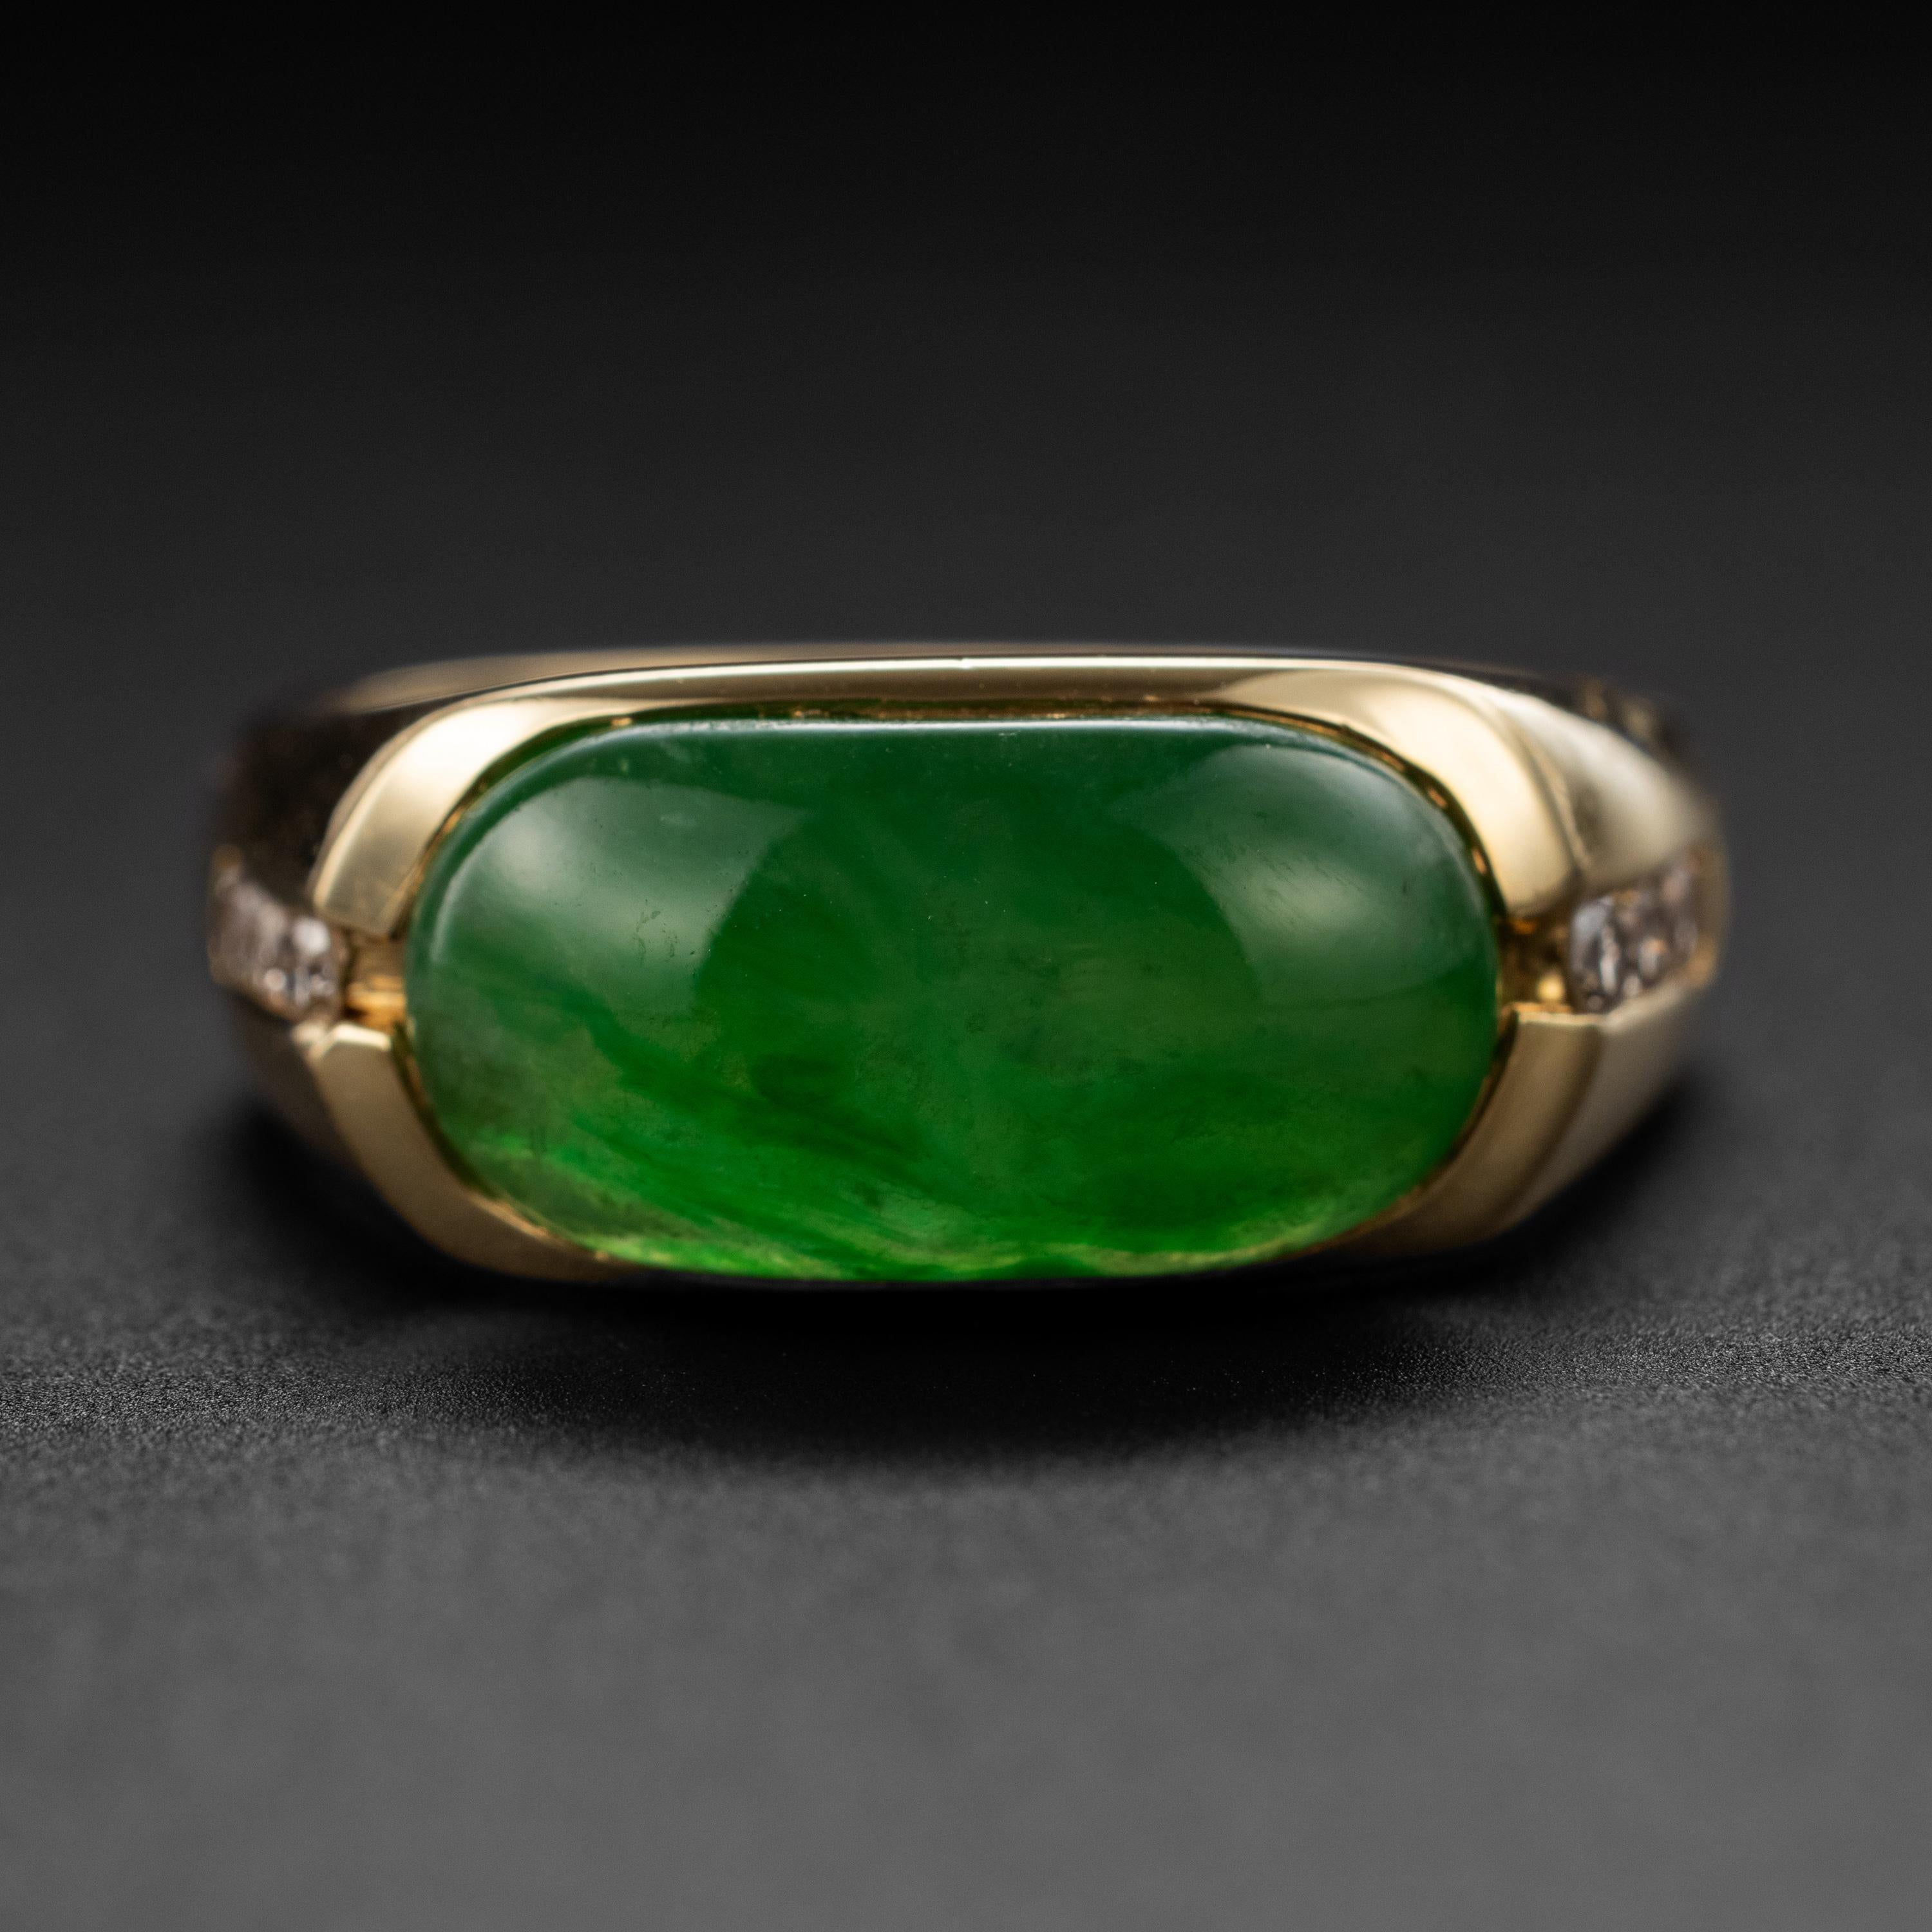 This classic and substantial jade saddle ring features a vivid, highly translucent cabochon of certified untreated emerald green Burmese jadeite jade that is cut into the rectangular 